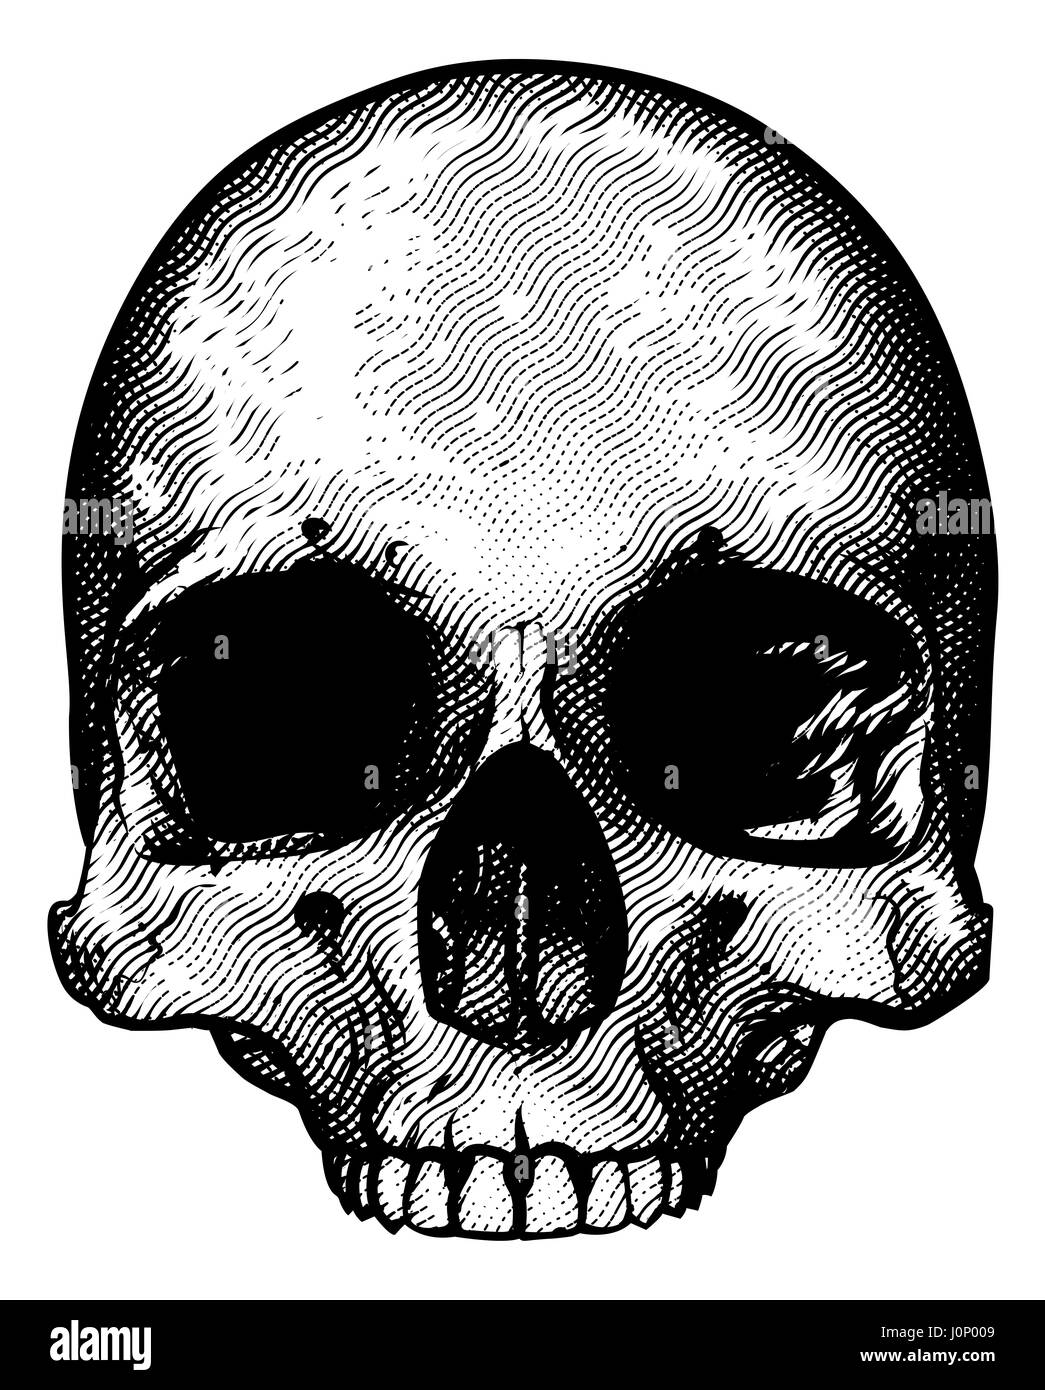 Skull in a vintage retro hand drawn woodcut etched or engraved style Stock Photo